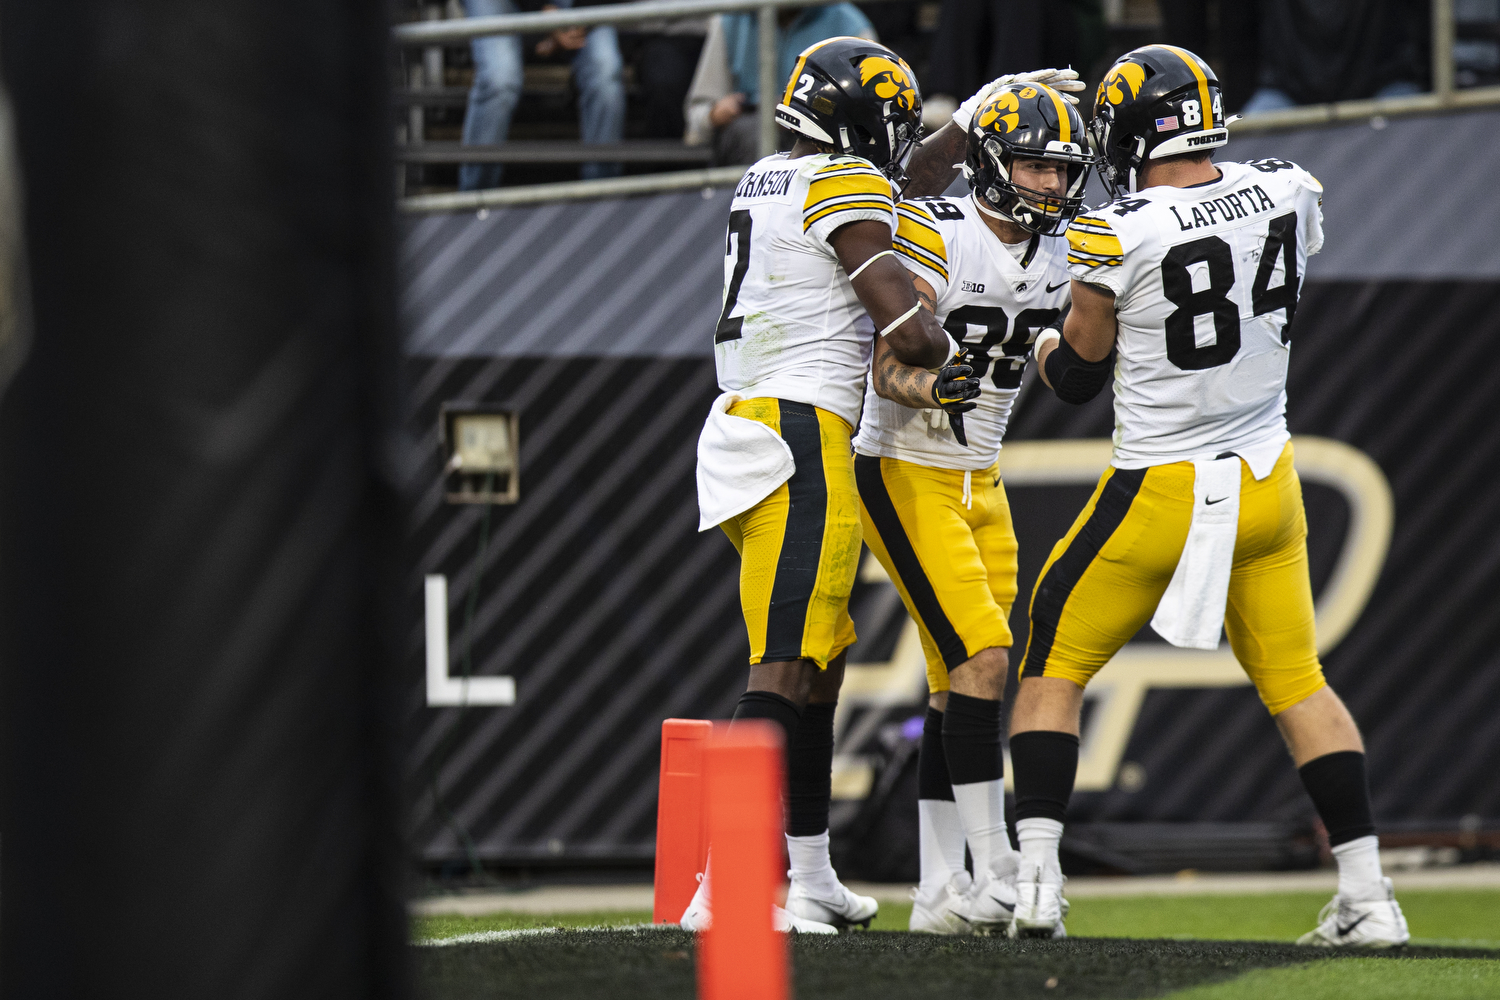 Iowa football team battles windy conditions in victory over Purdue